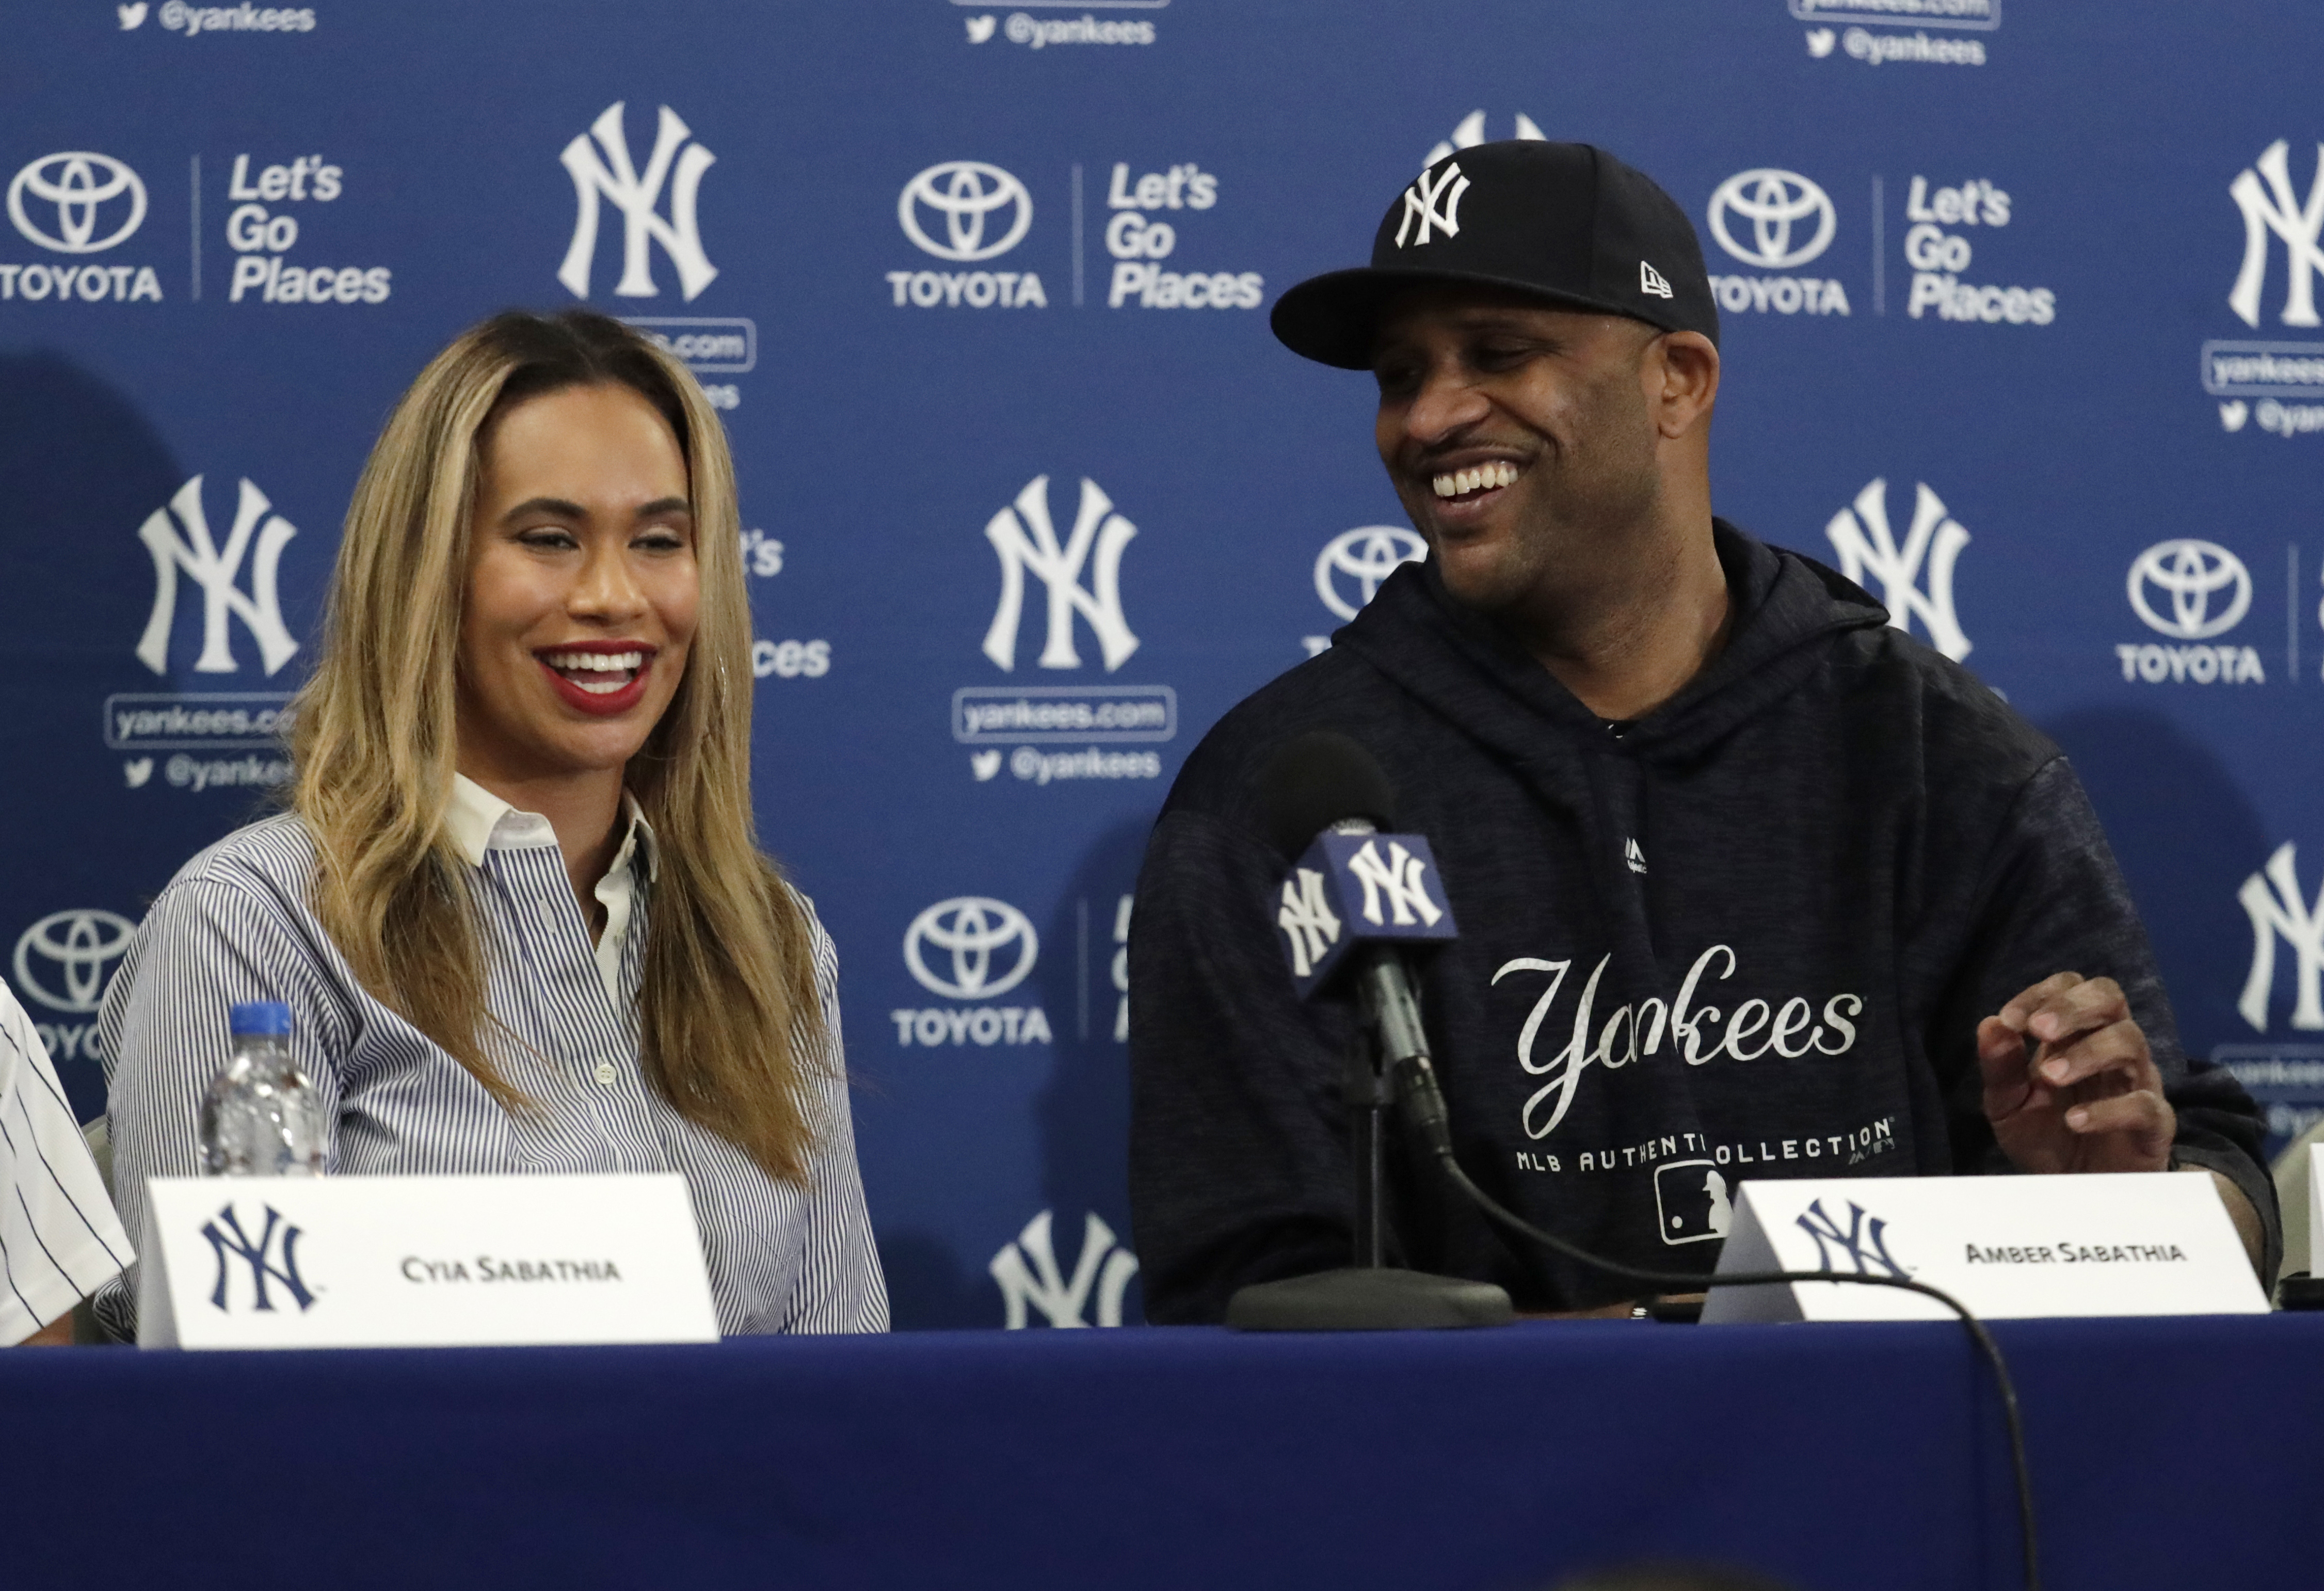 All in the family: Ex-Yankees ace CC Sabathia's wife steps to the